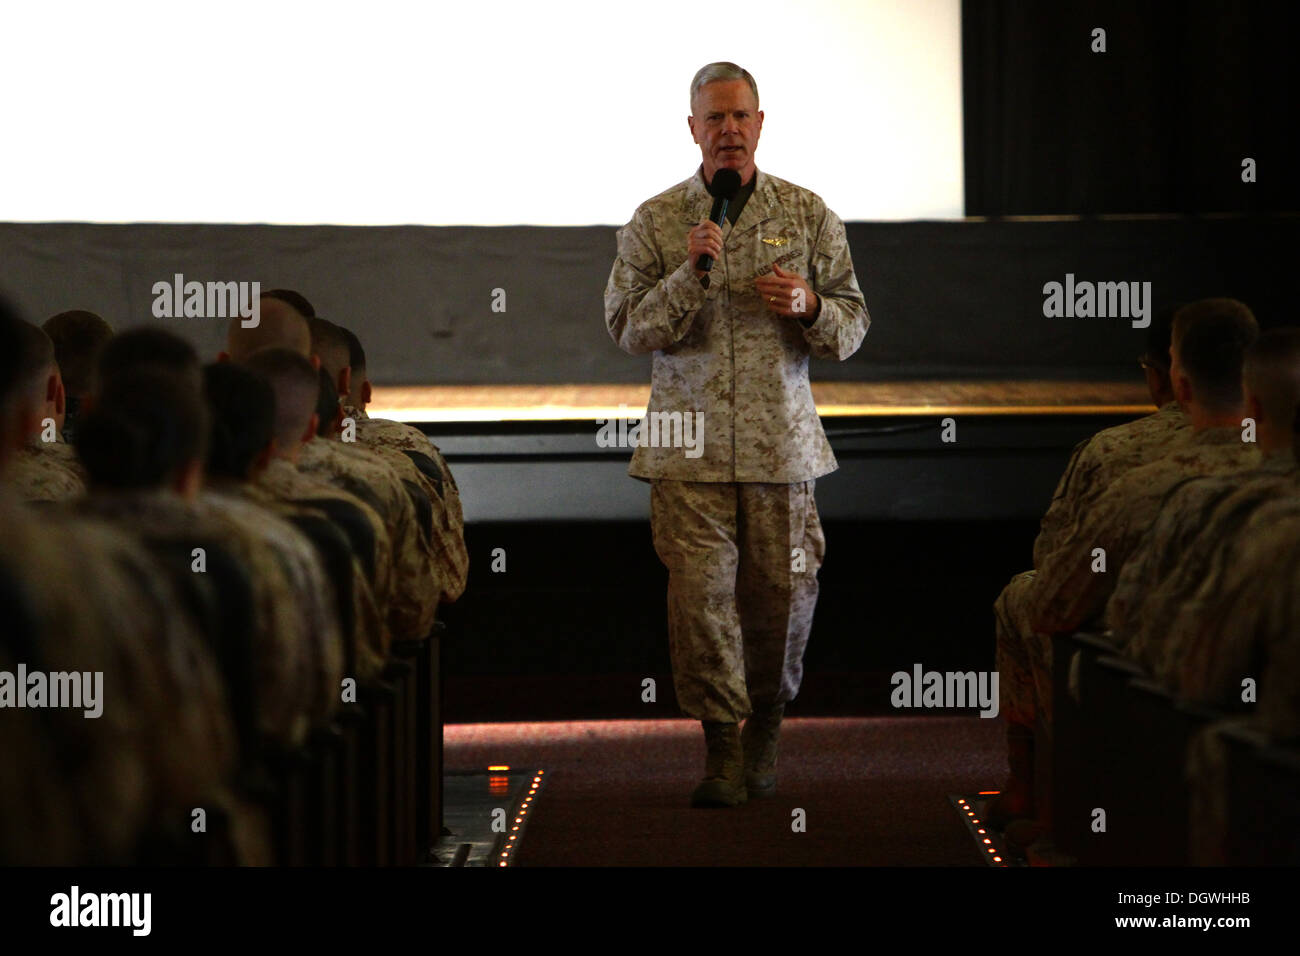 The commandant of the Marine Corps, Gen. James F. Amos and the 17th sergeant major of the Marine Corps, Sgt. Maj. Micheal P. Barrett, address Marine noncommissioned officers (NCO’s) with 3rd Marine Aircraft Wing aboard Marine Corps Air Station Miramar, Sa Stock Photo